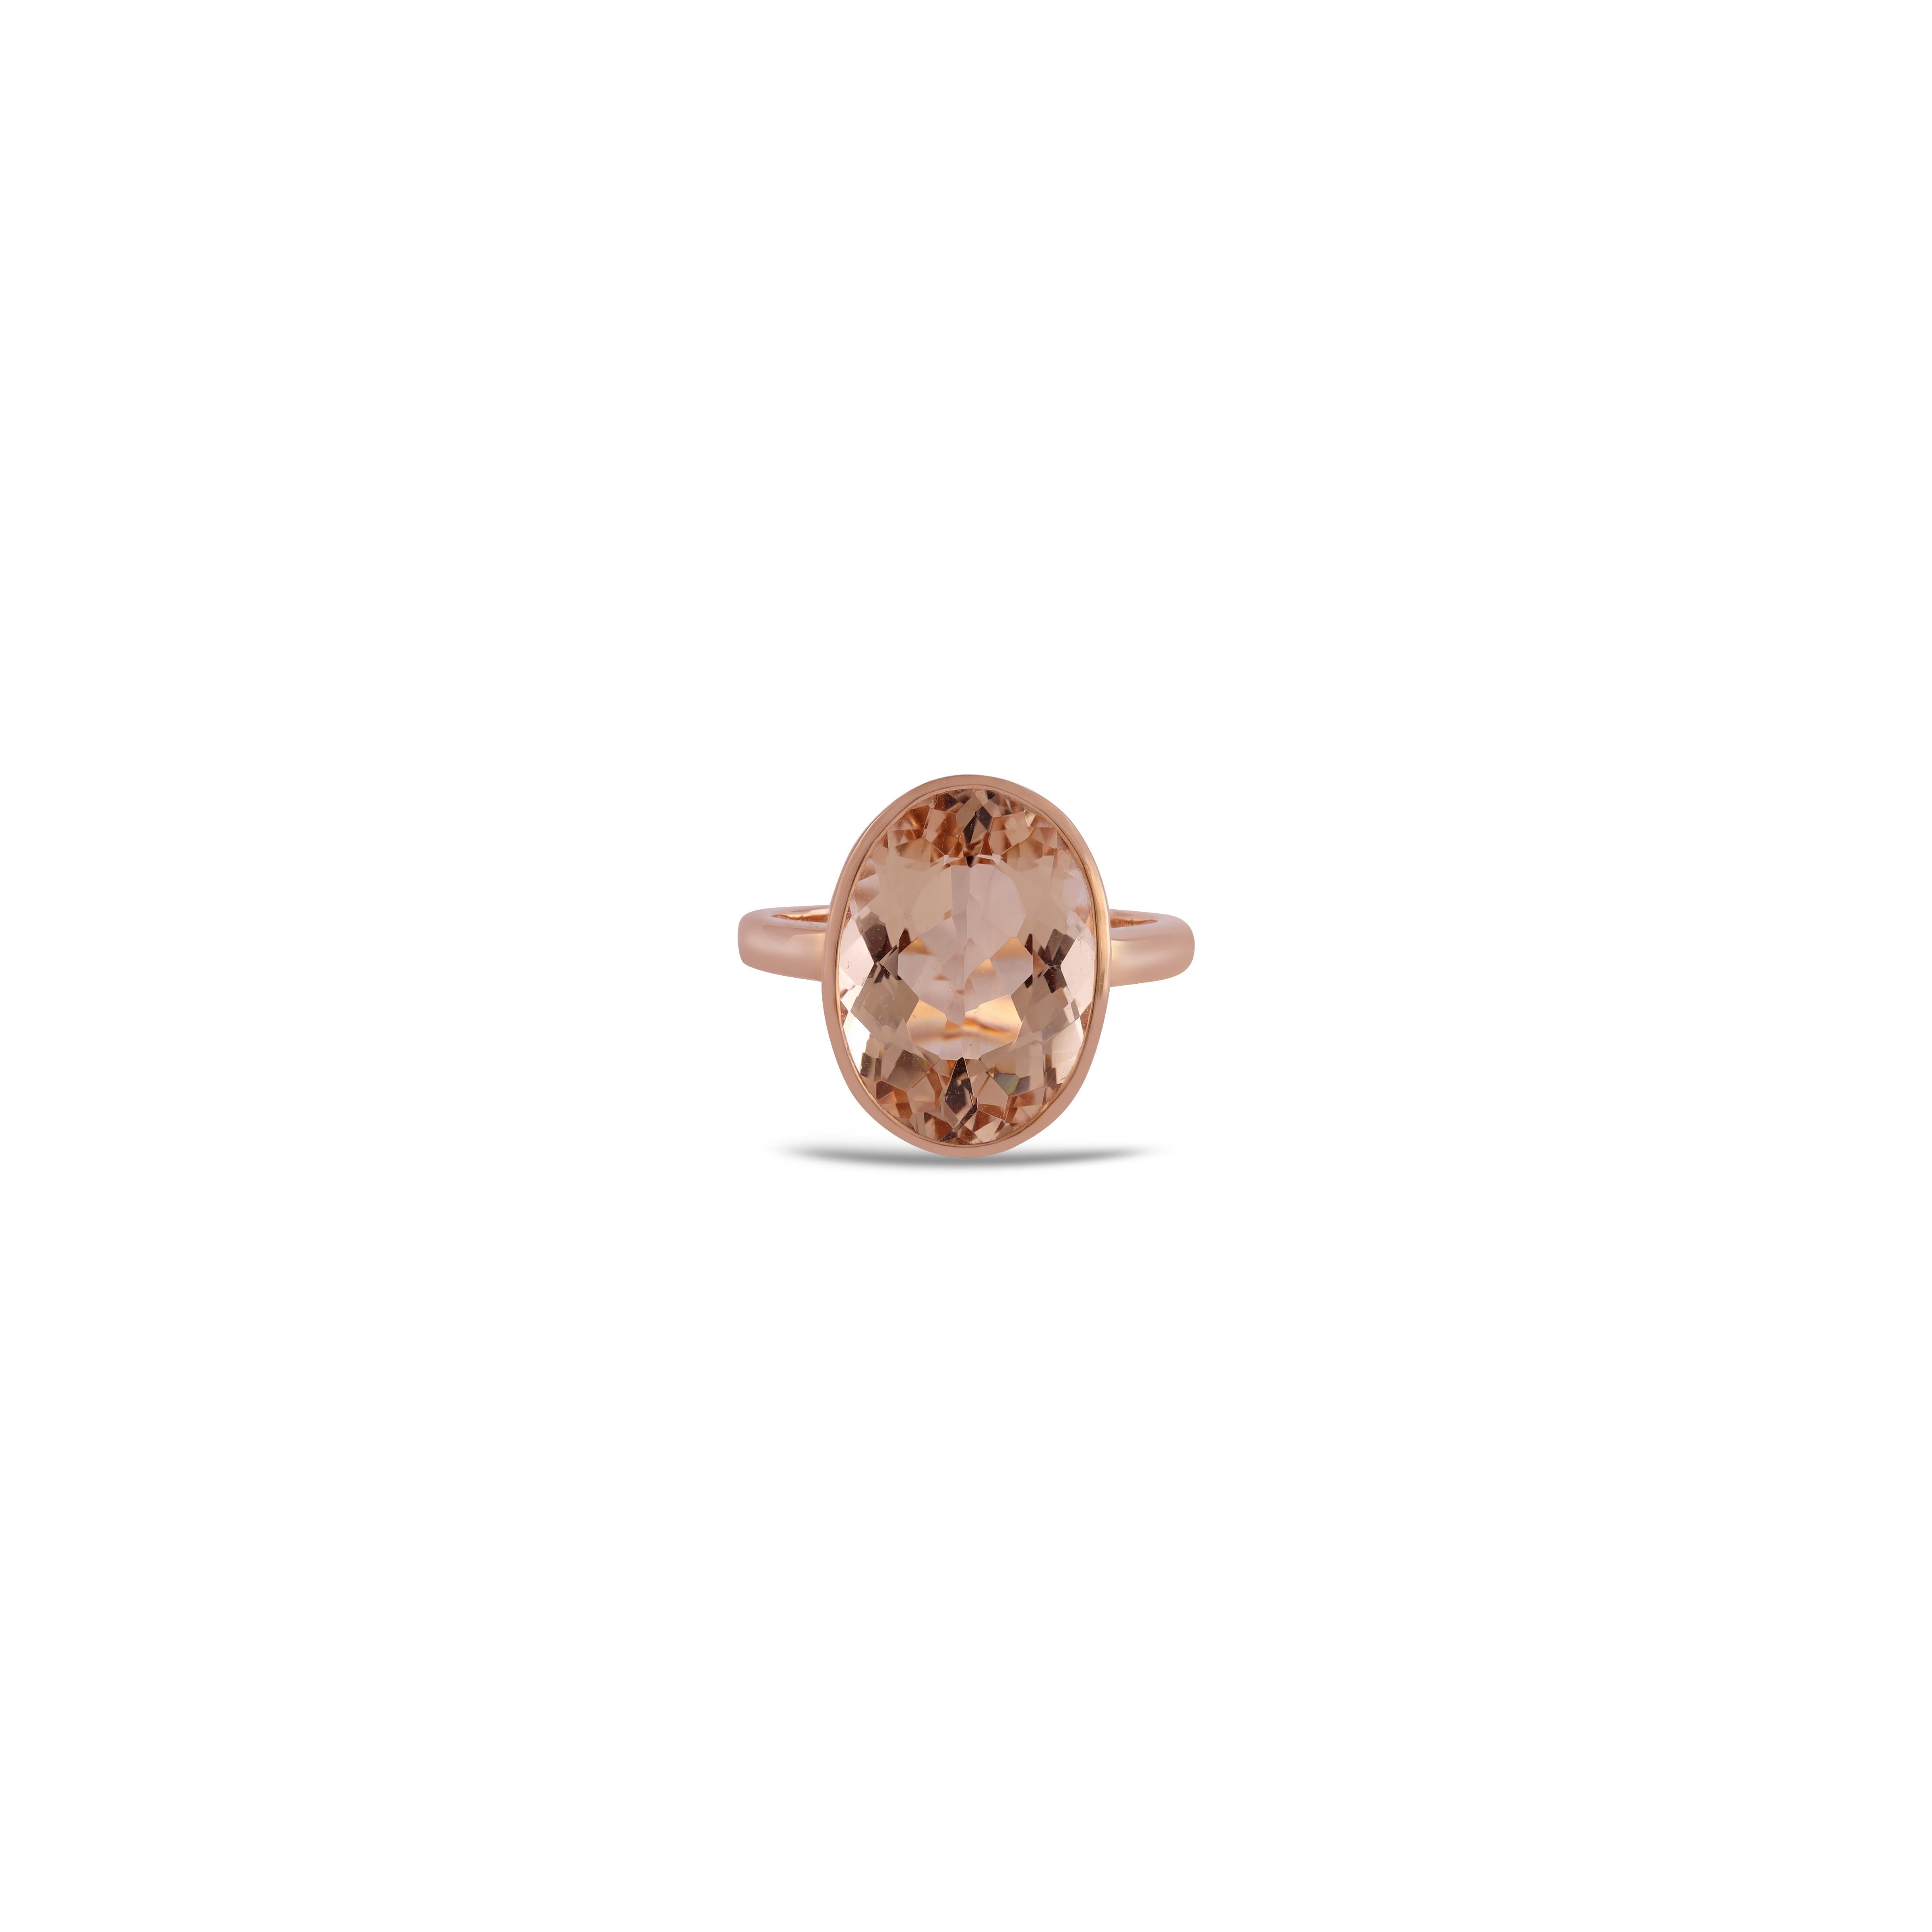 If you are looking for Morganite Ring, this is the ultimate find, (7.10 carats) of the finest Morganite color is the focal point  Perfectly matched in color, size, luster, and transparency. The color is what you want. 



Ring come along with